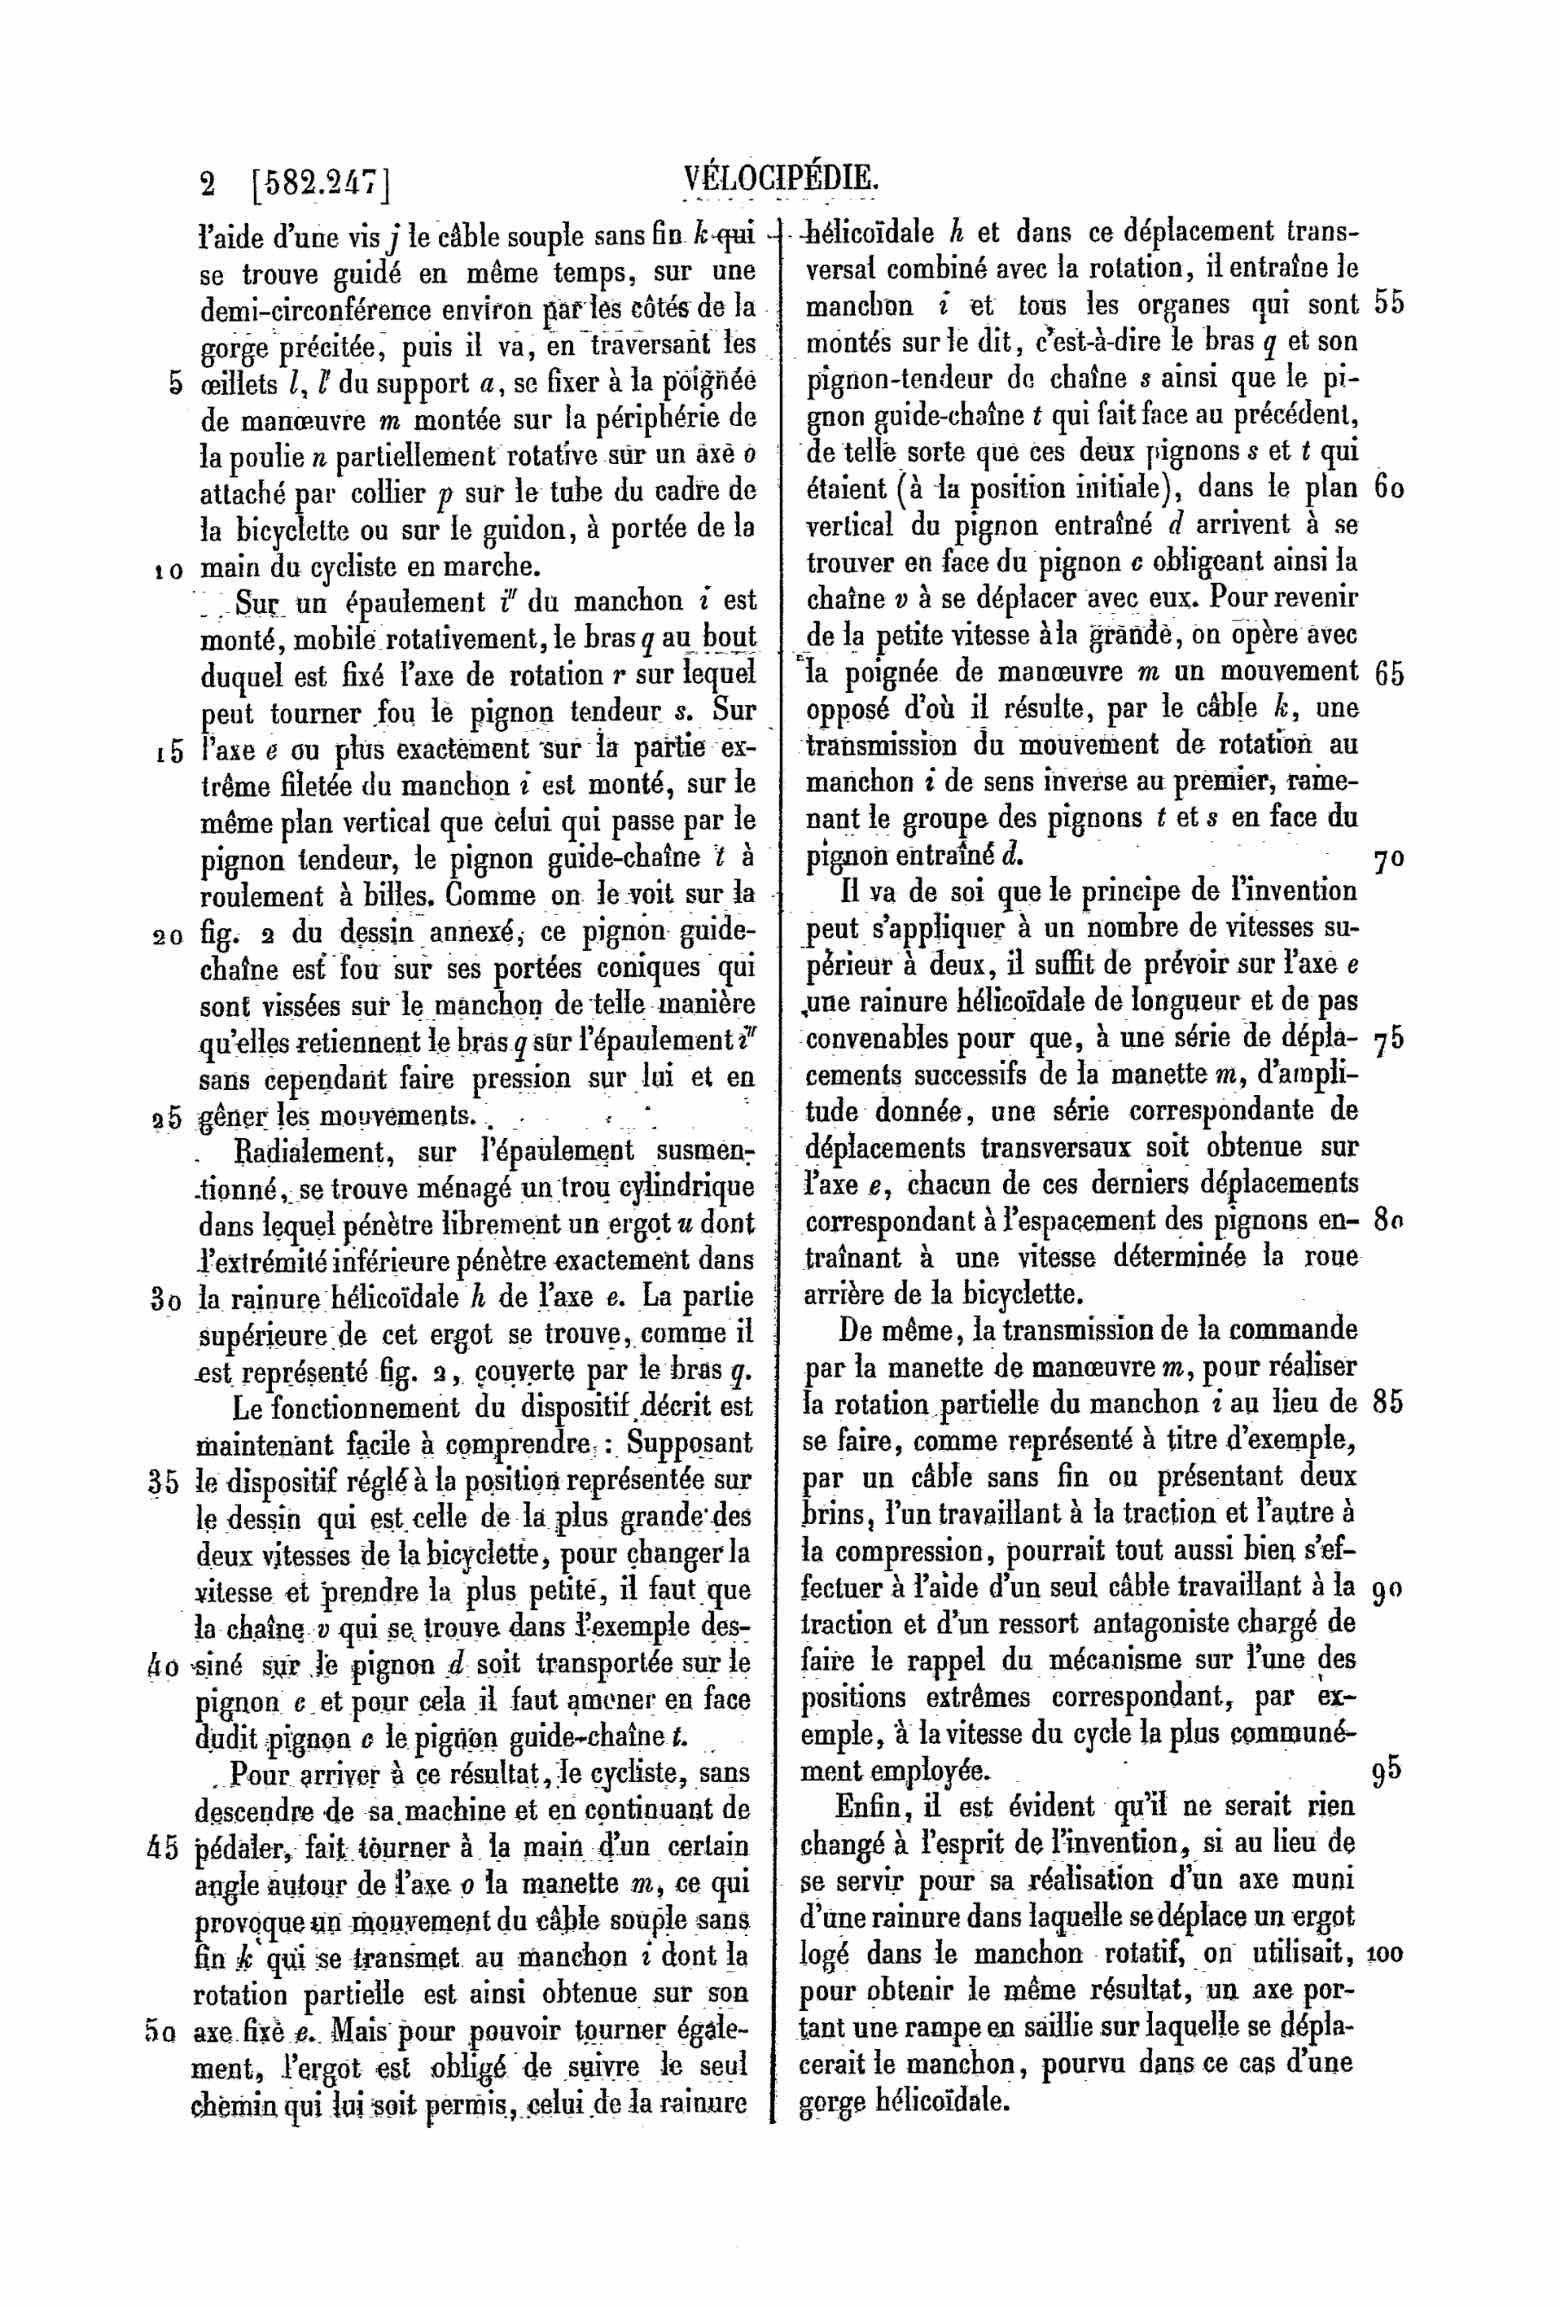 French Patent 582,247 - Le Cyclo scan 2 main image